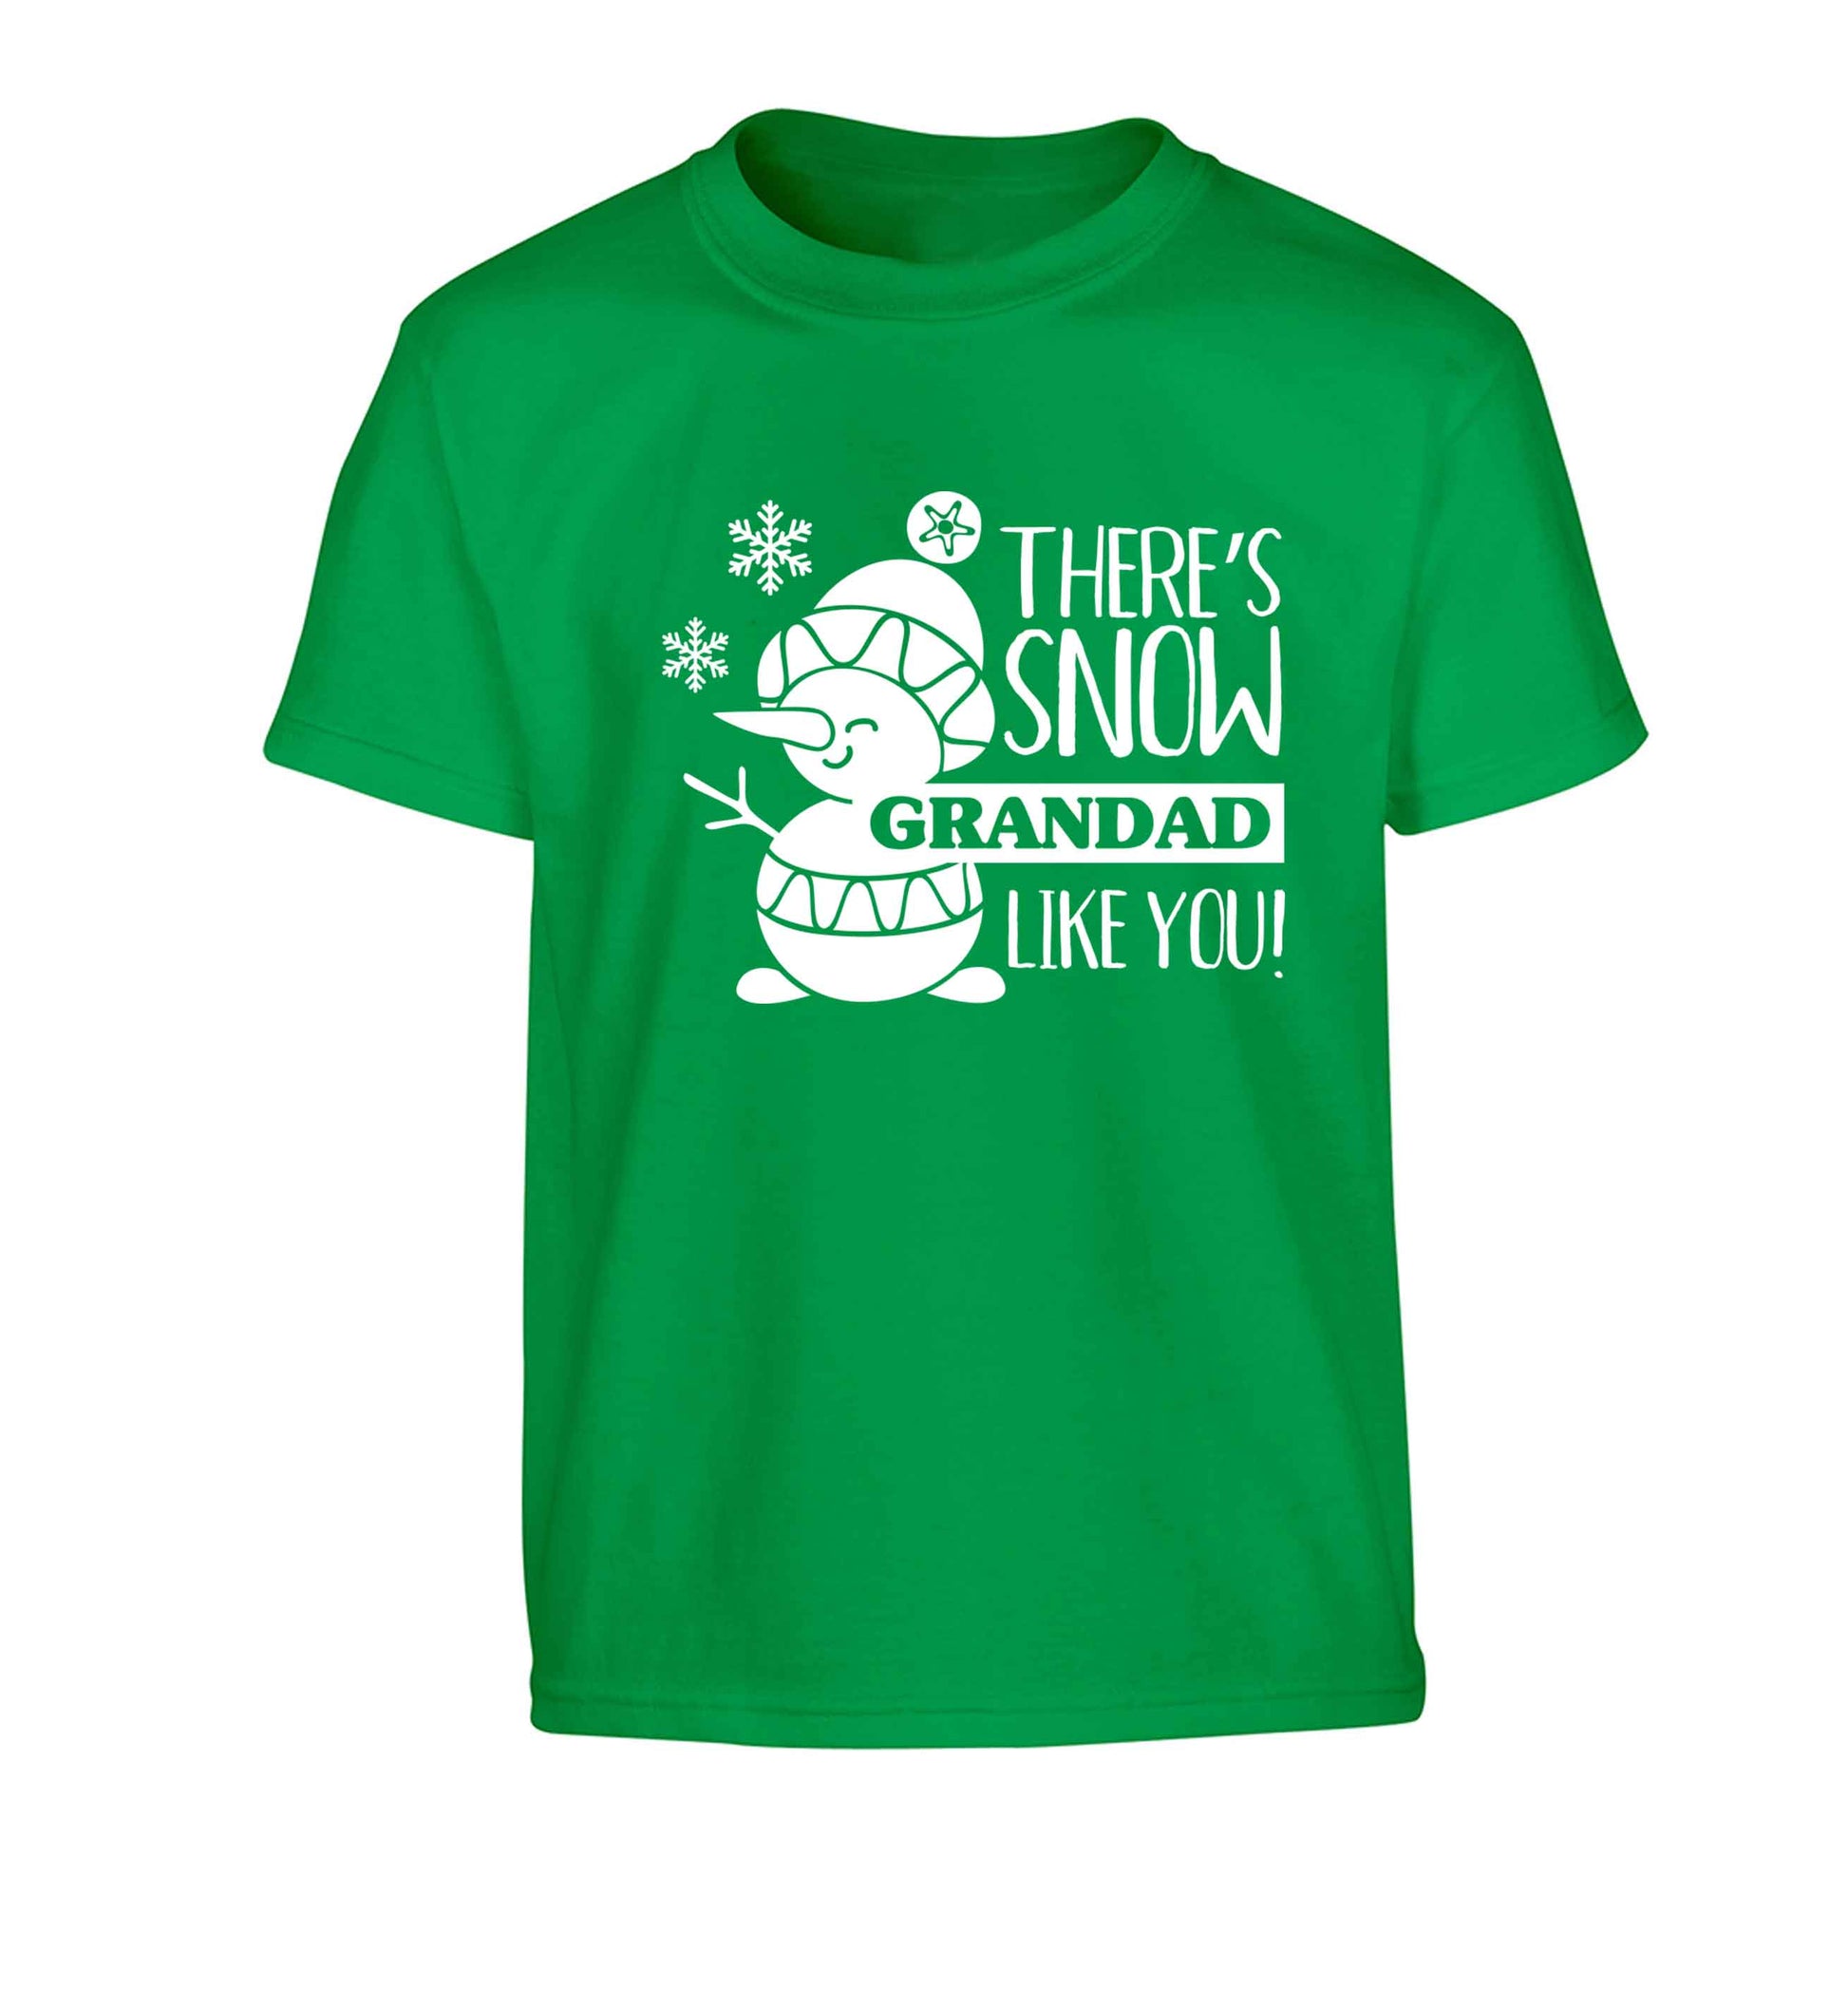 There's snow grandad like you Children's green Tshirt 12-13 Years